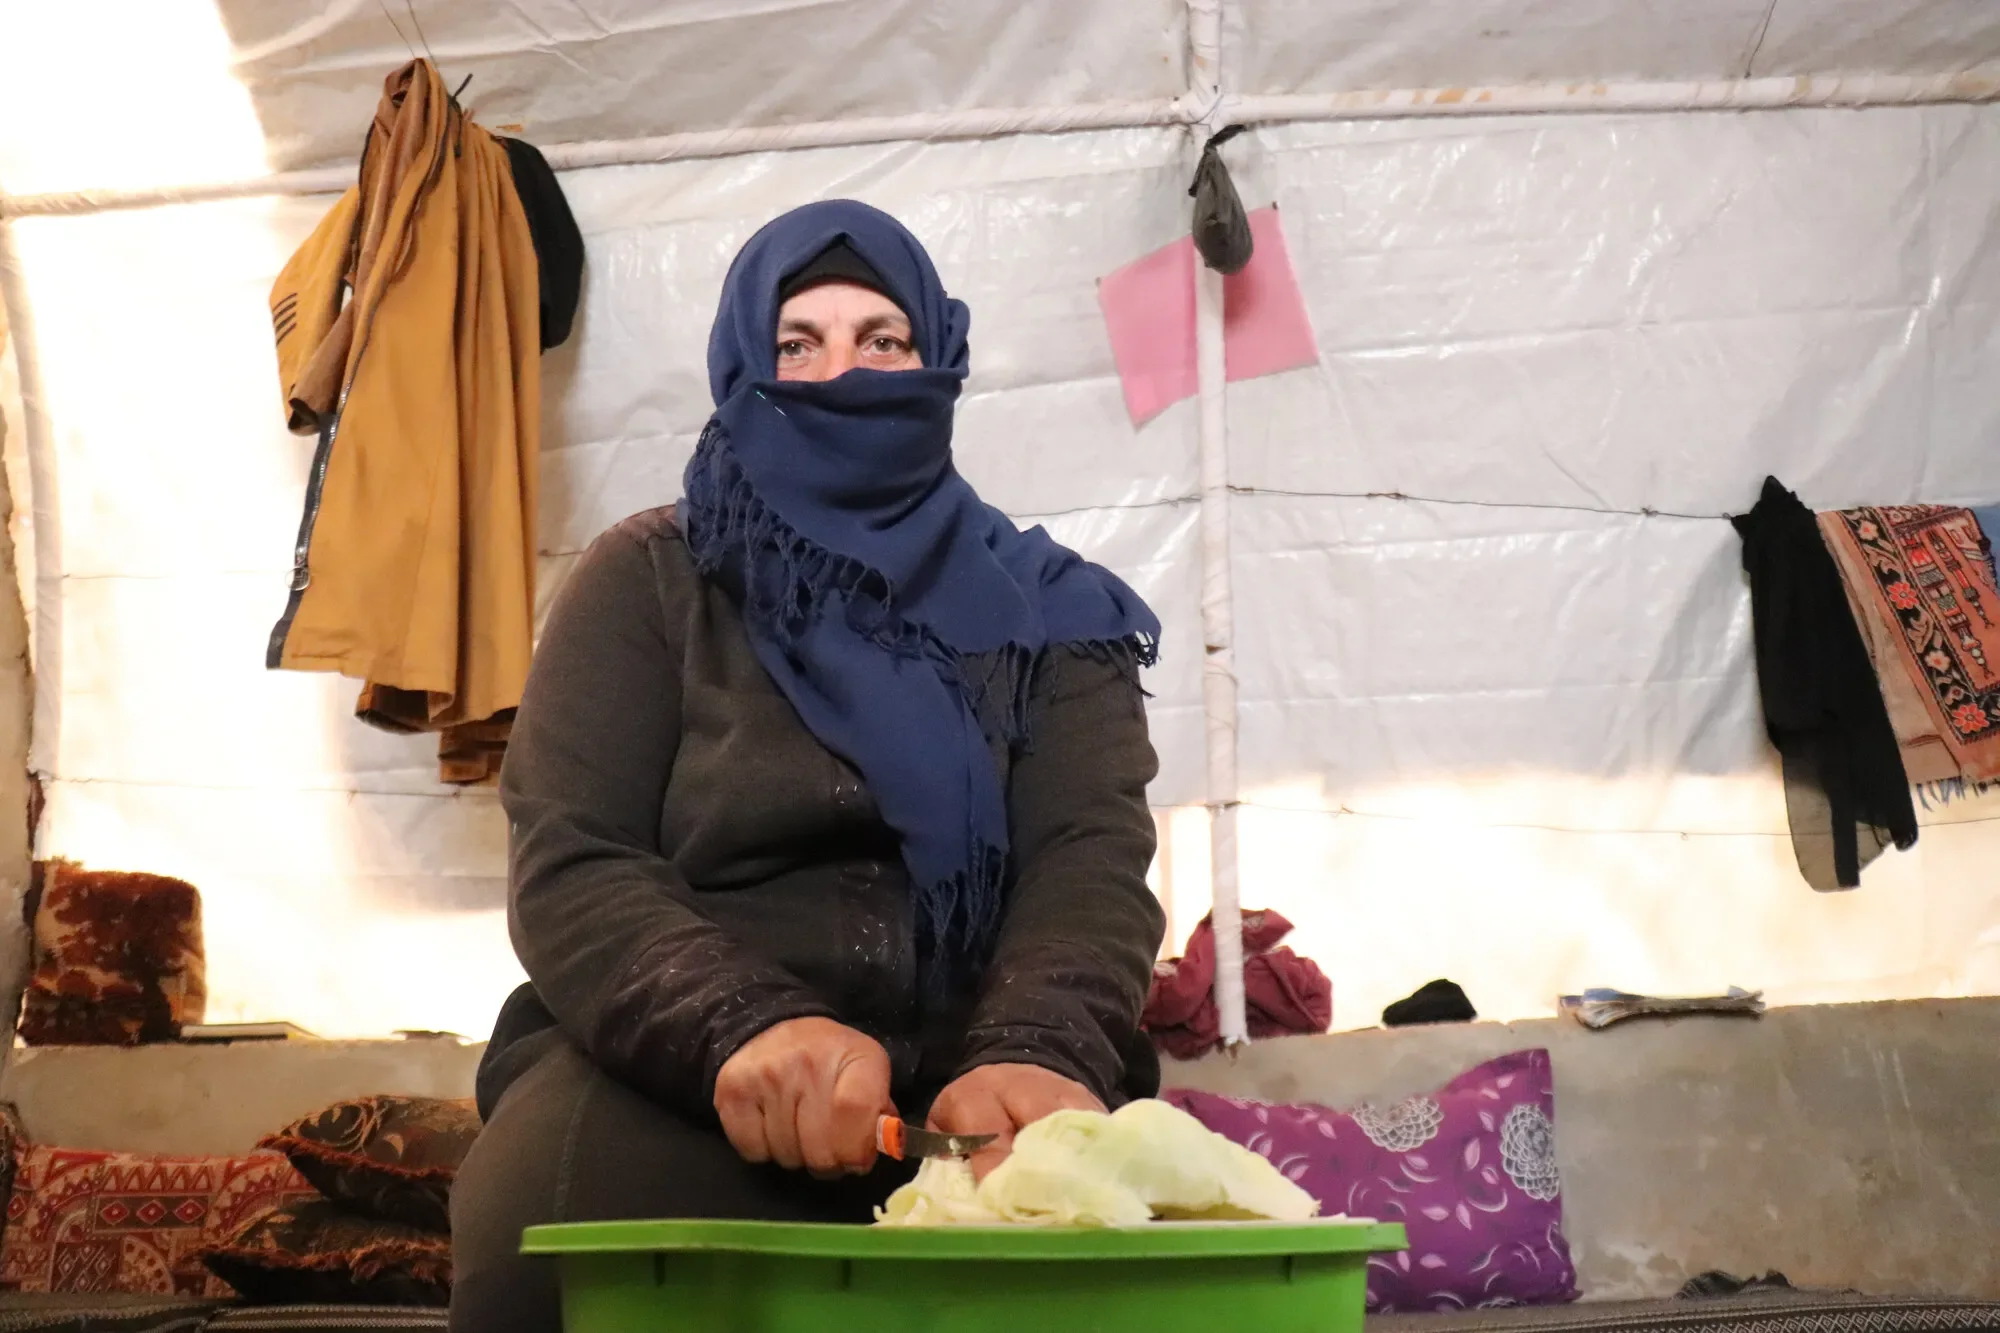 An internally displaced Syrian woman preparing food in her tent.